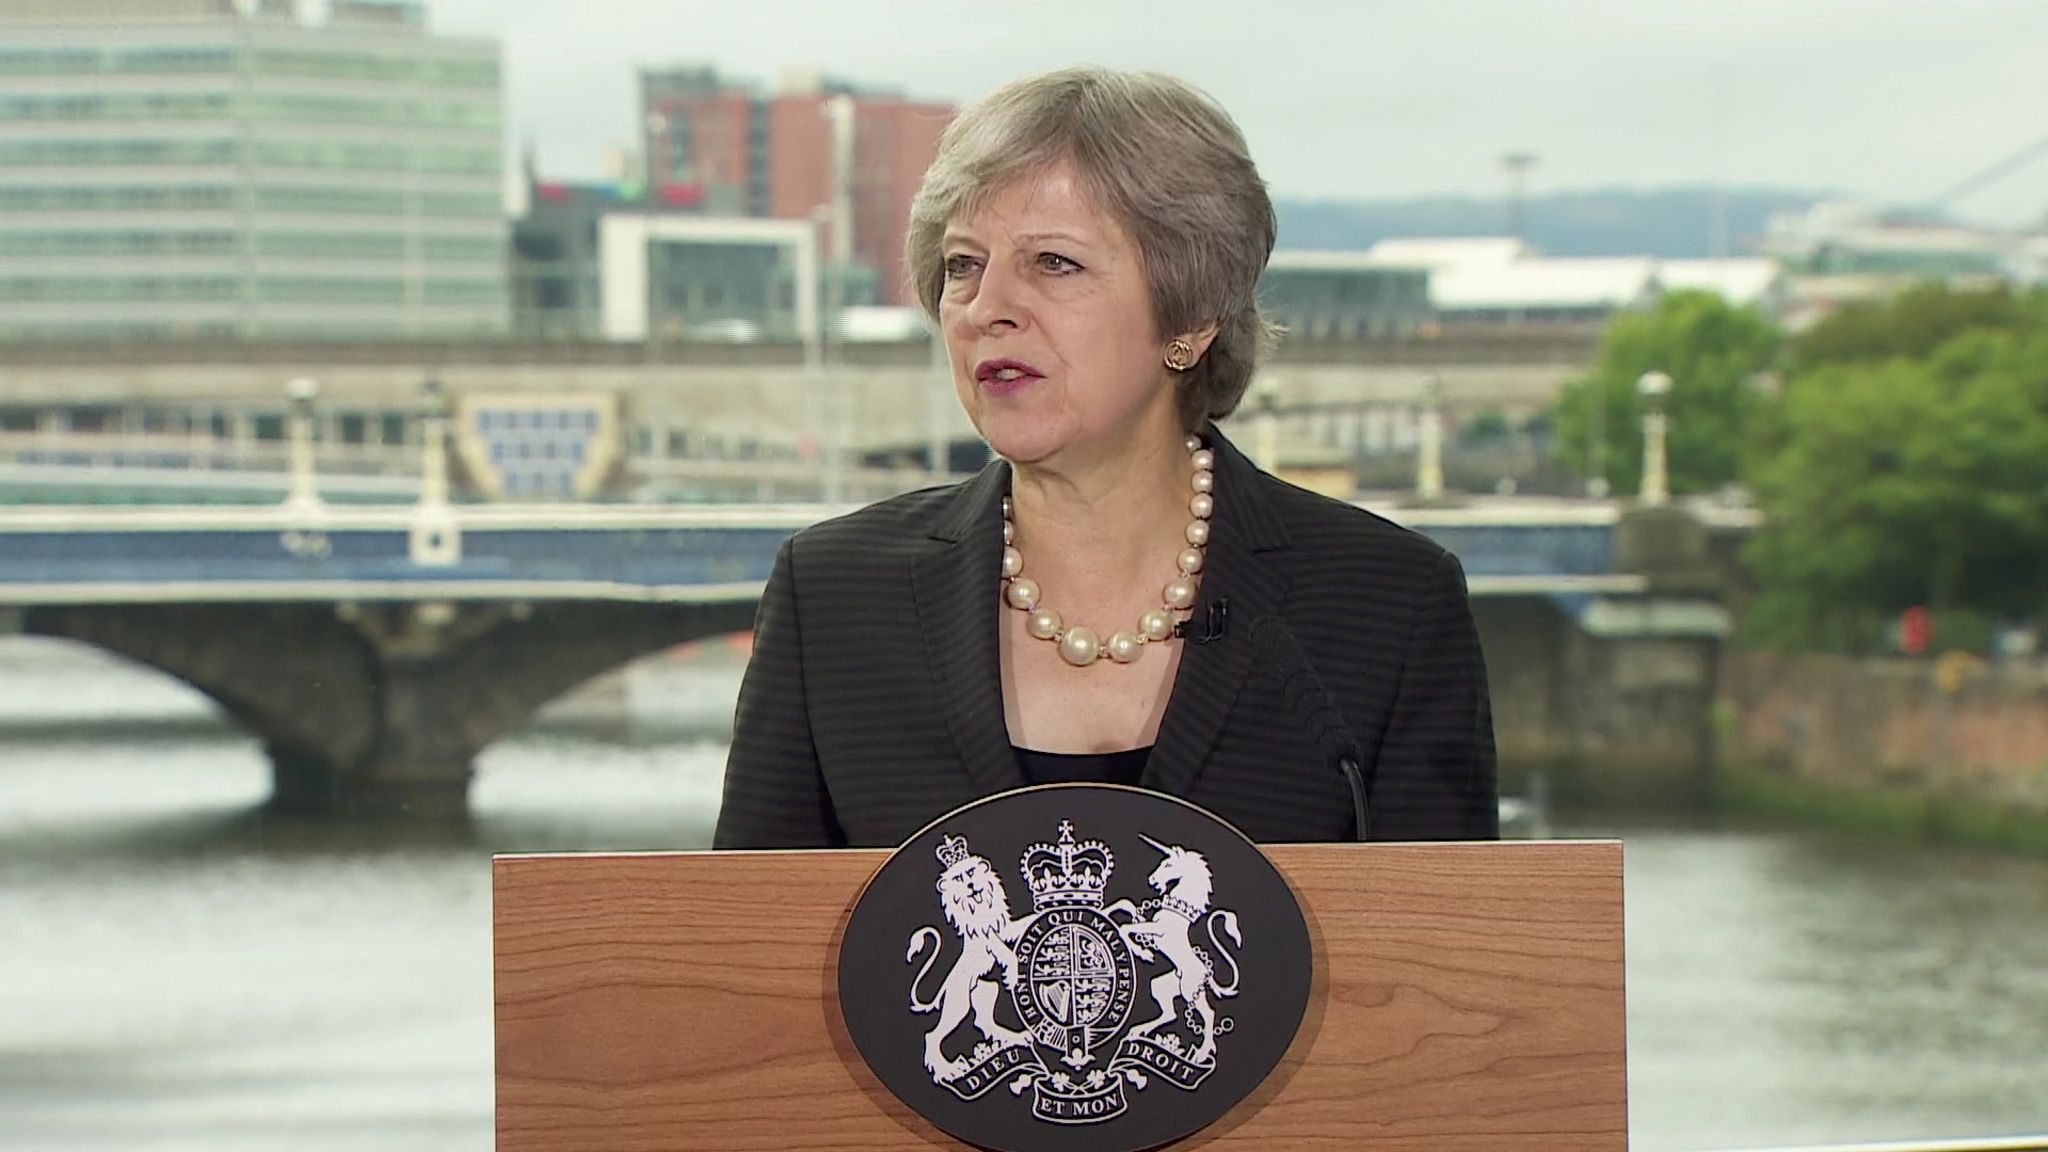 Theresa May is giving a speech in Belfast